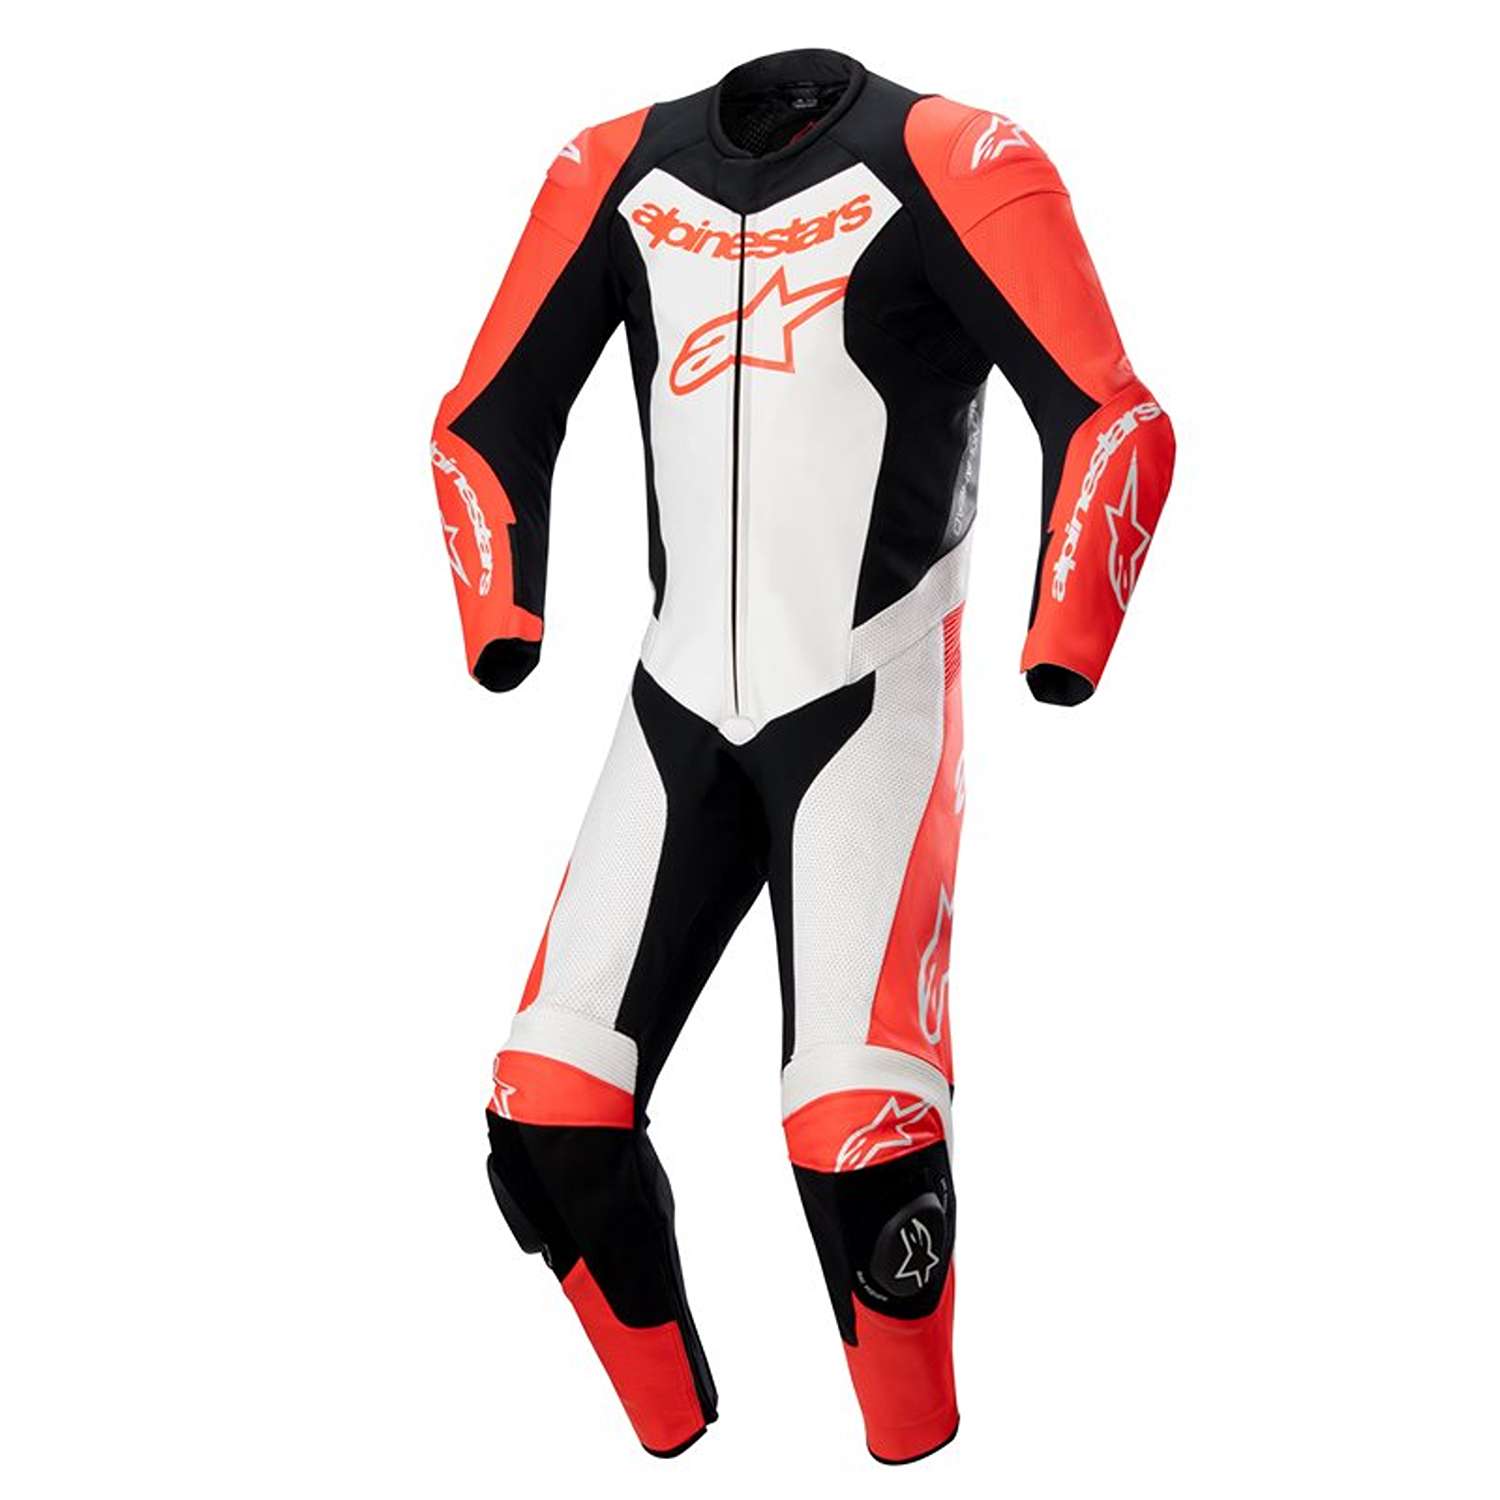 Image of Alpinestars Gp Force Lurv 1Pc Leather Suit Red Fluo White Black Size 60 ID 8059347340418